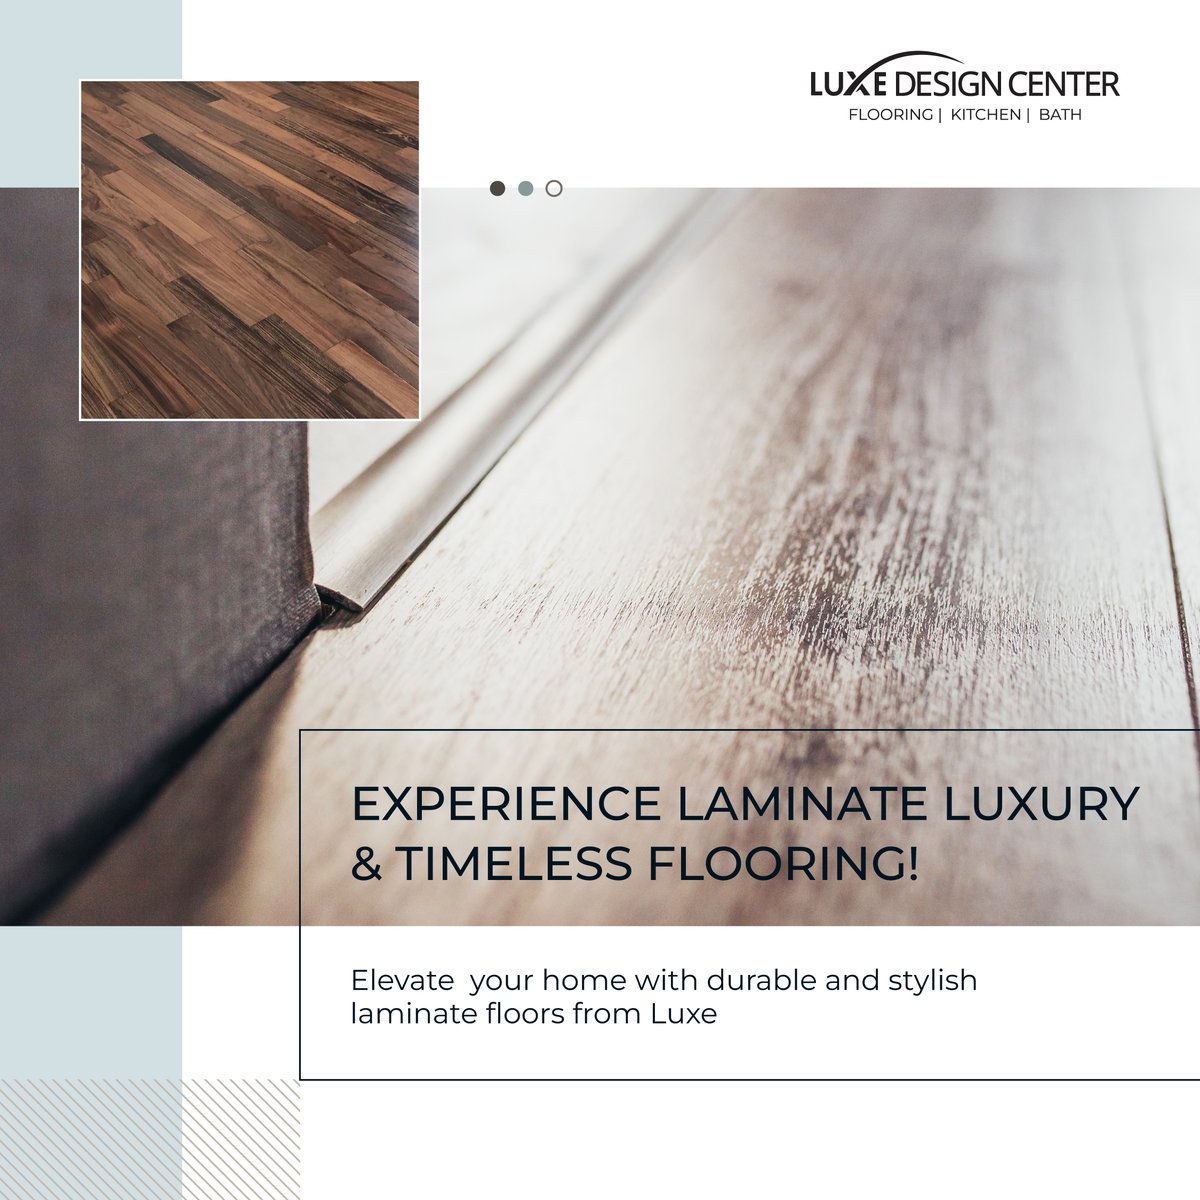 Durable, versatile, and oh-so-stylish, laminate floors seamlessly blend beauty with practicality. Choose from an array of designs, from realistic wood textures to modern patterns. Ready to reimagine your floors?

#LaminateLuxury #FlooringElegance #HomeRevamp #LuxeLiving